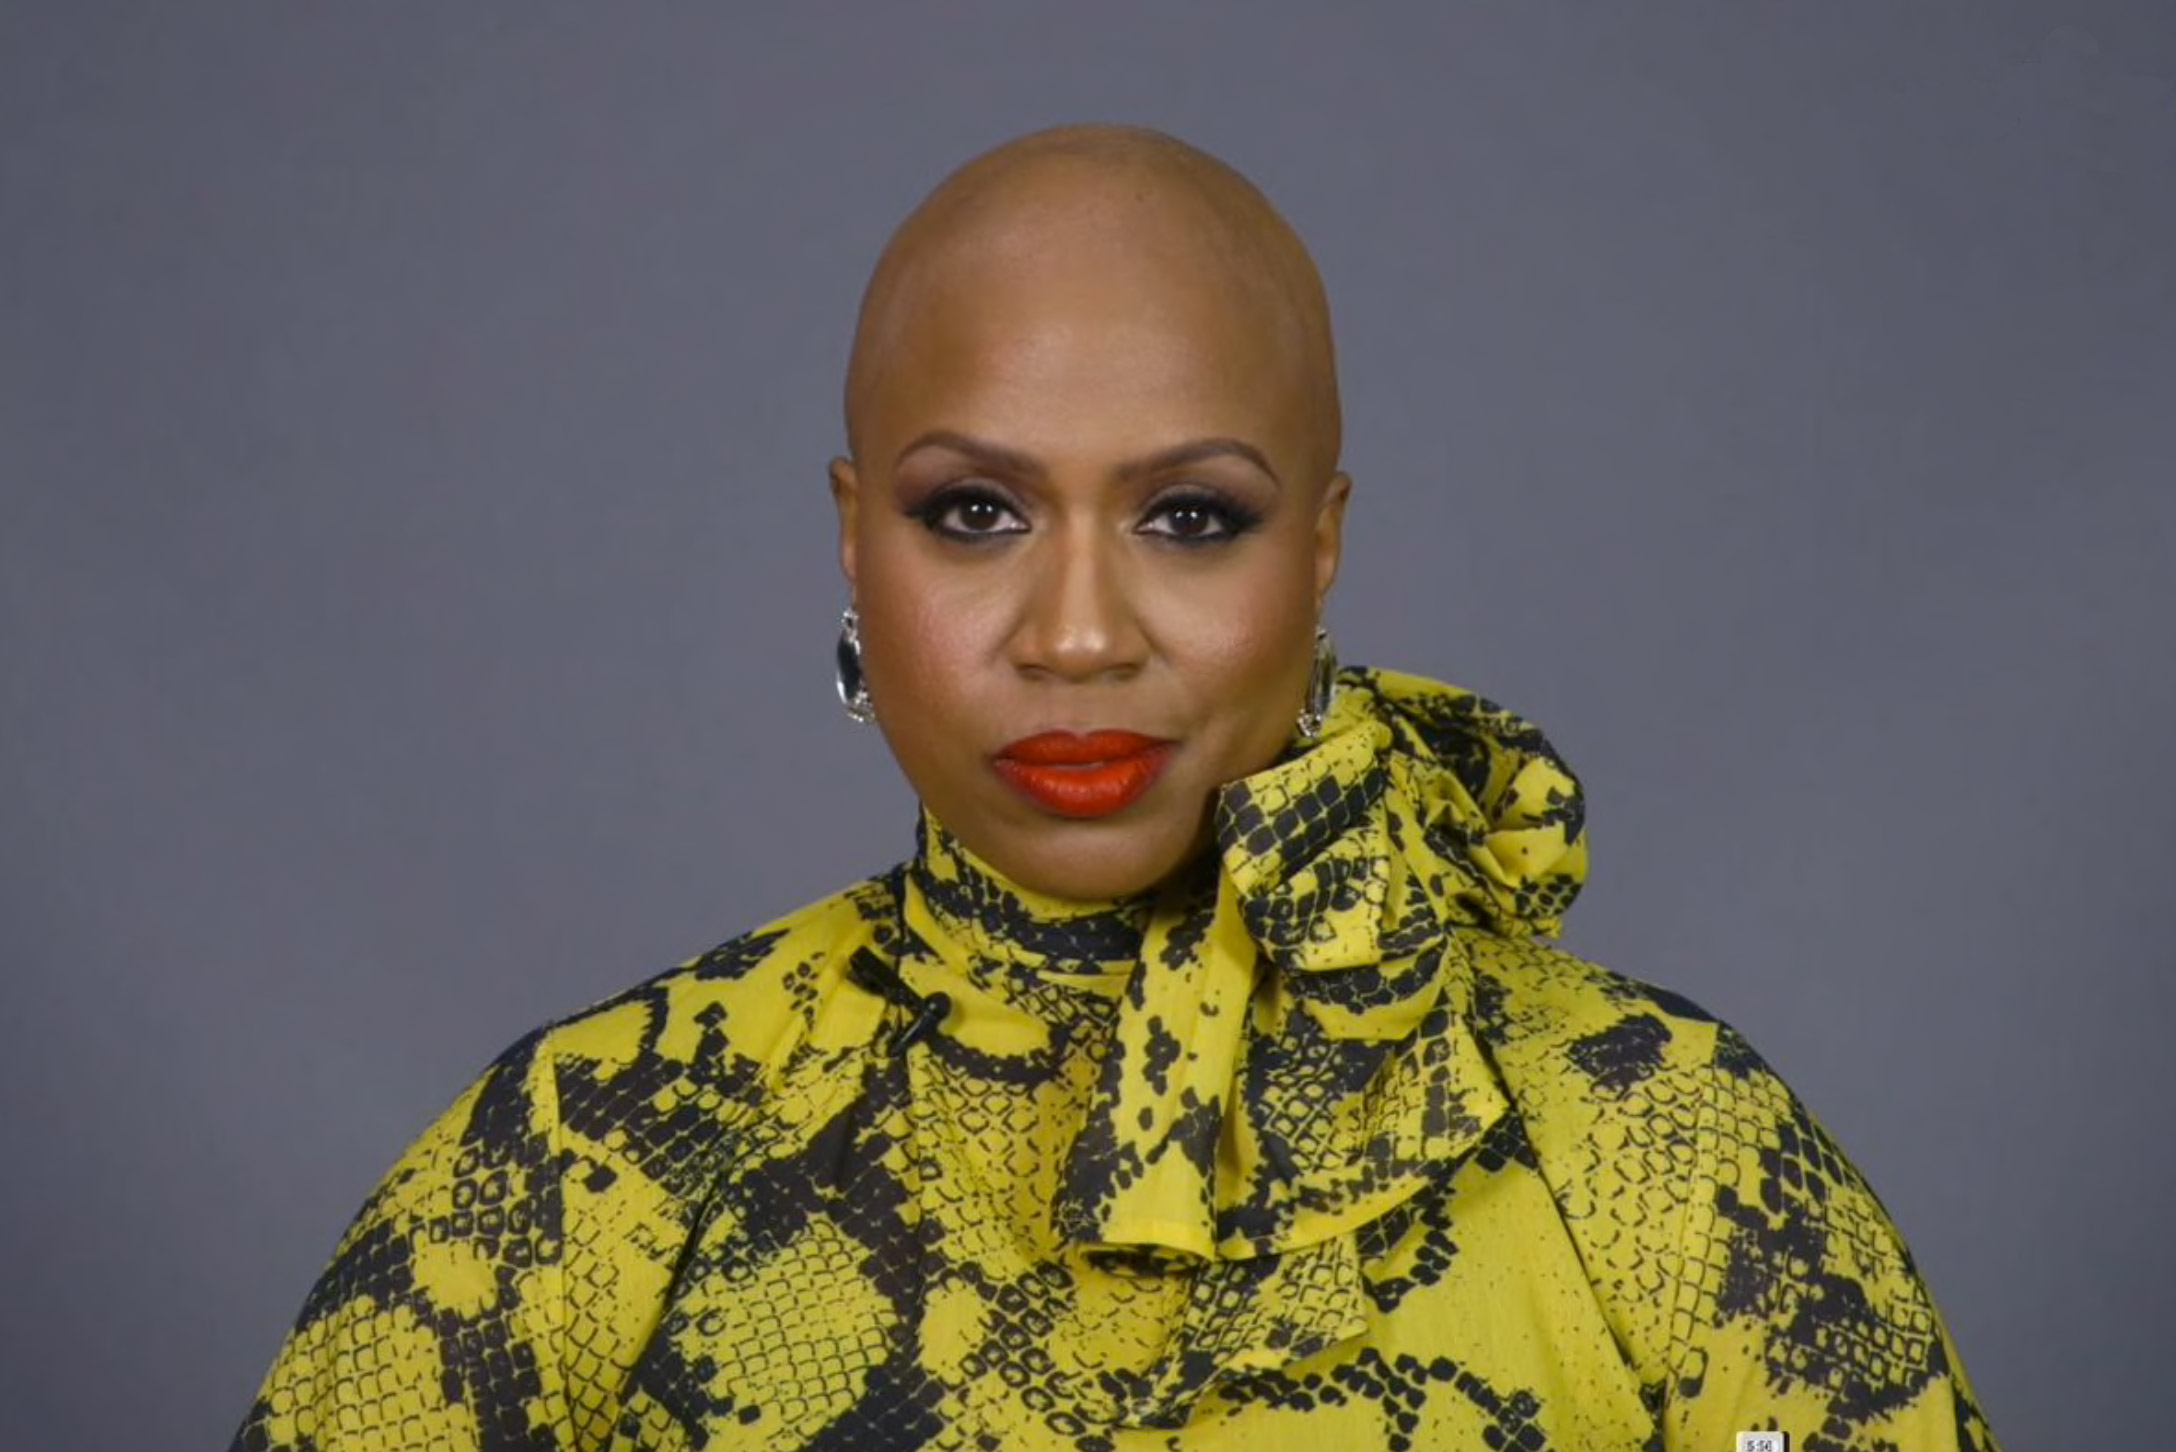 This Woman With Alopecia Just Got the Most Amazing Hair Transformation   Allure